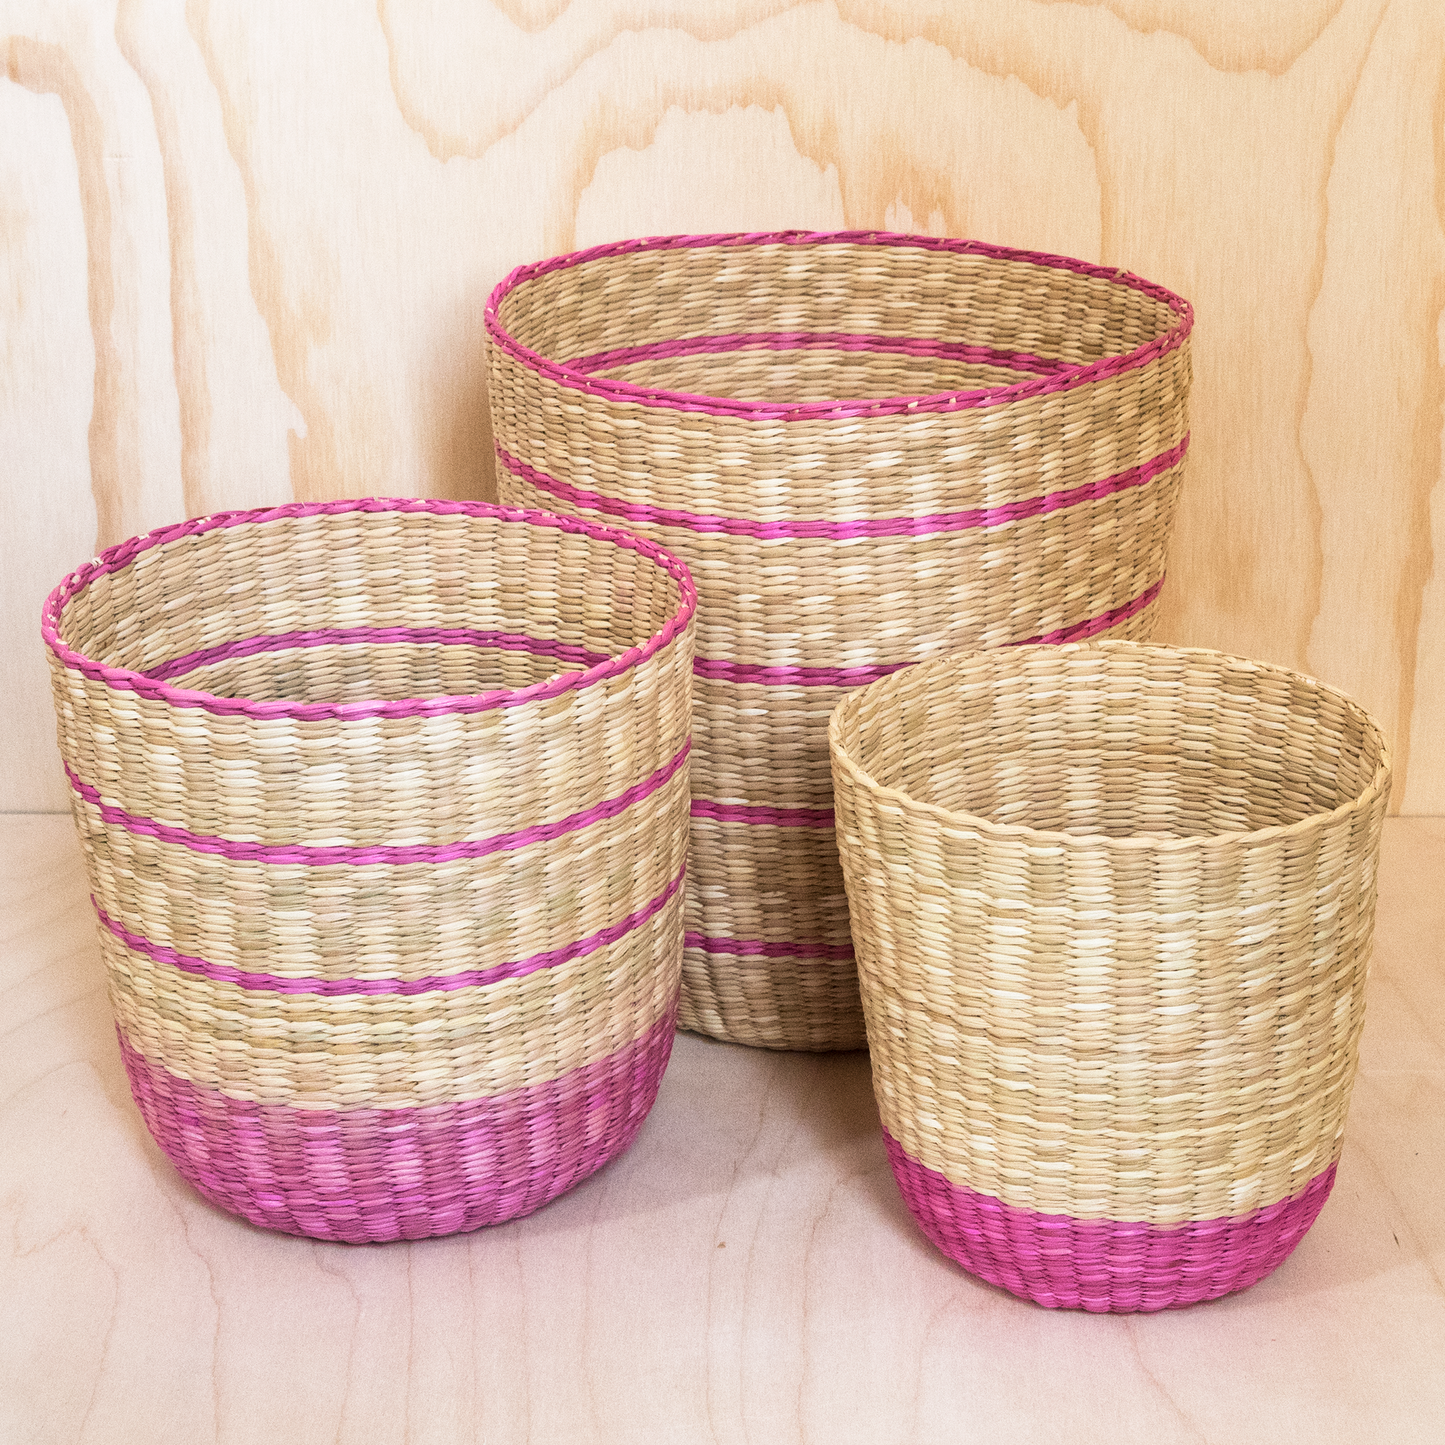 intiearth nesting baskets handwoven junco reed pink